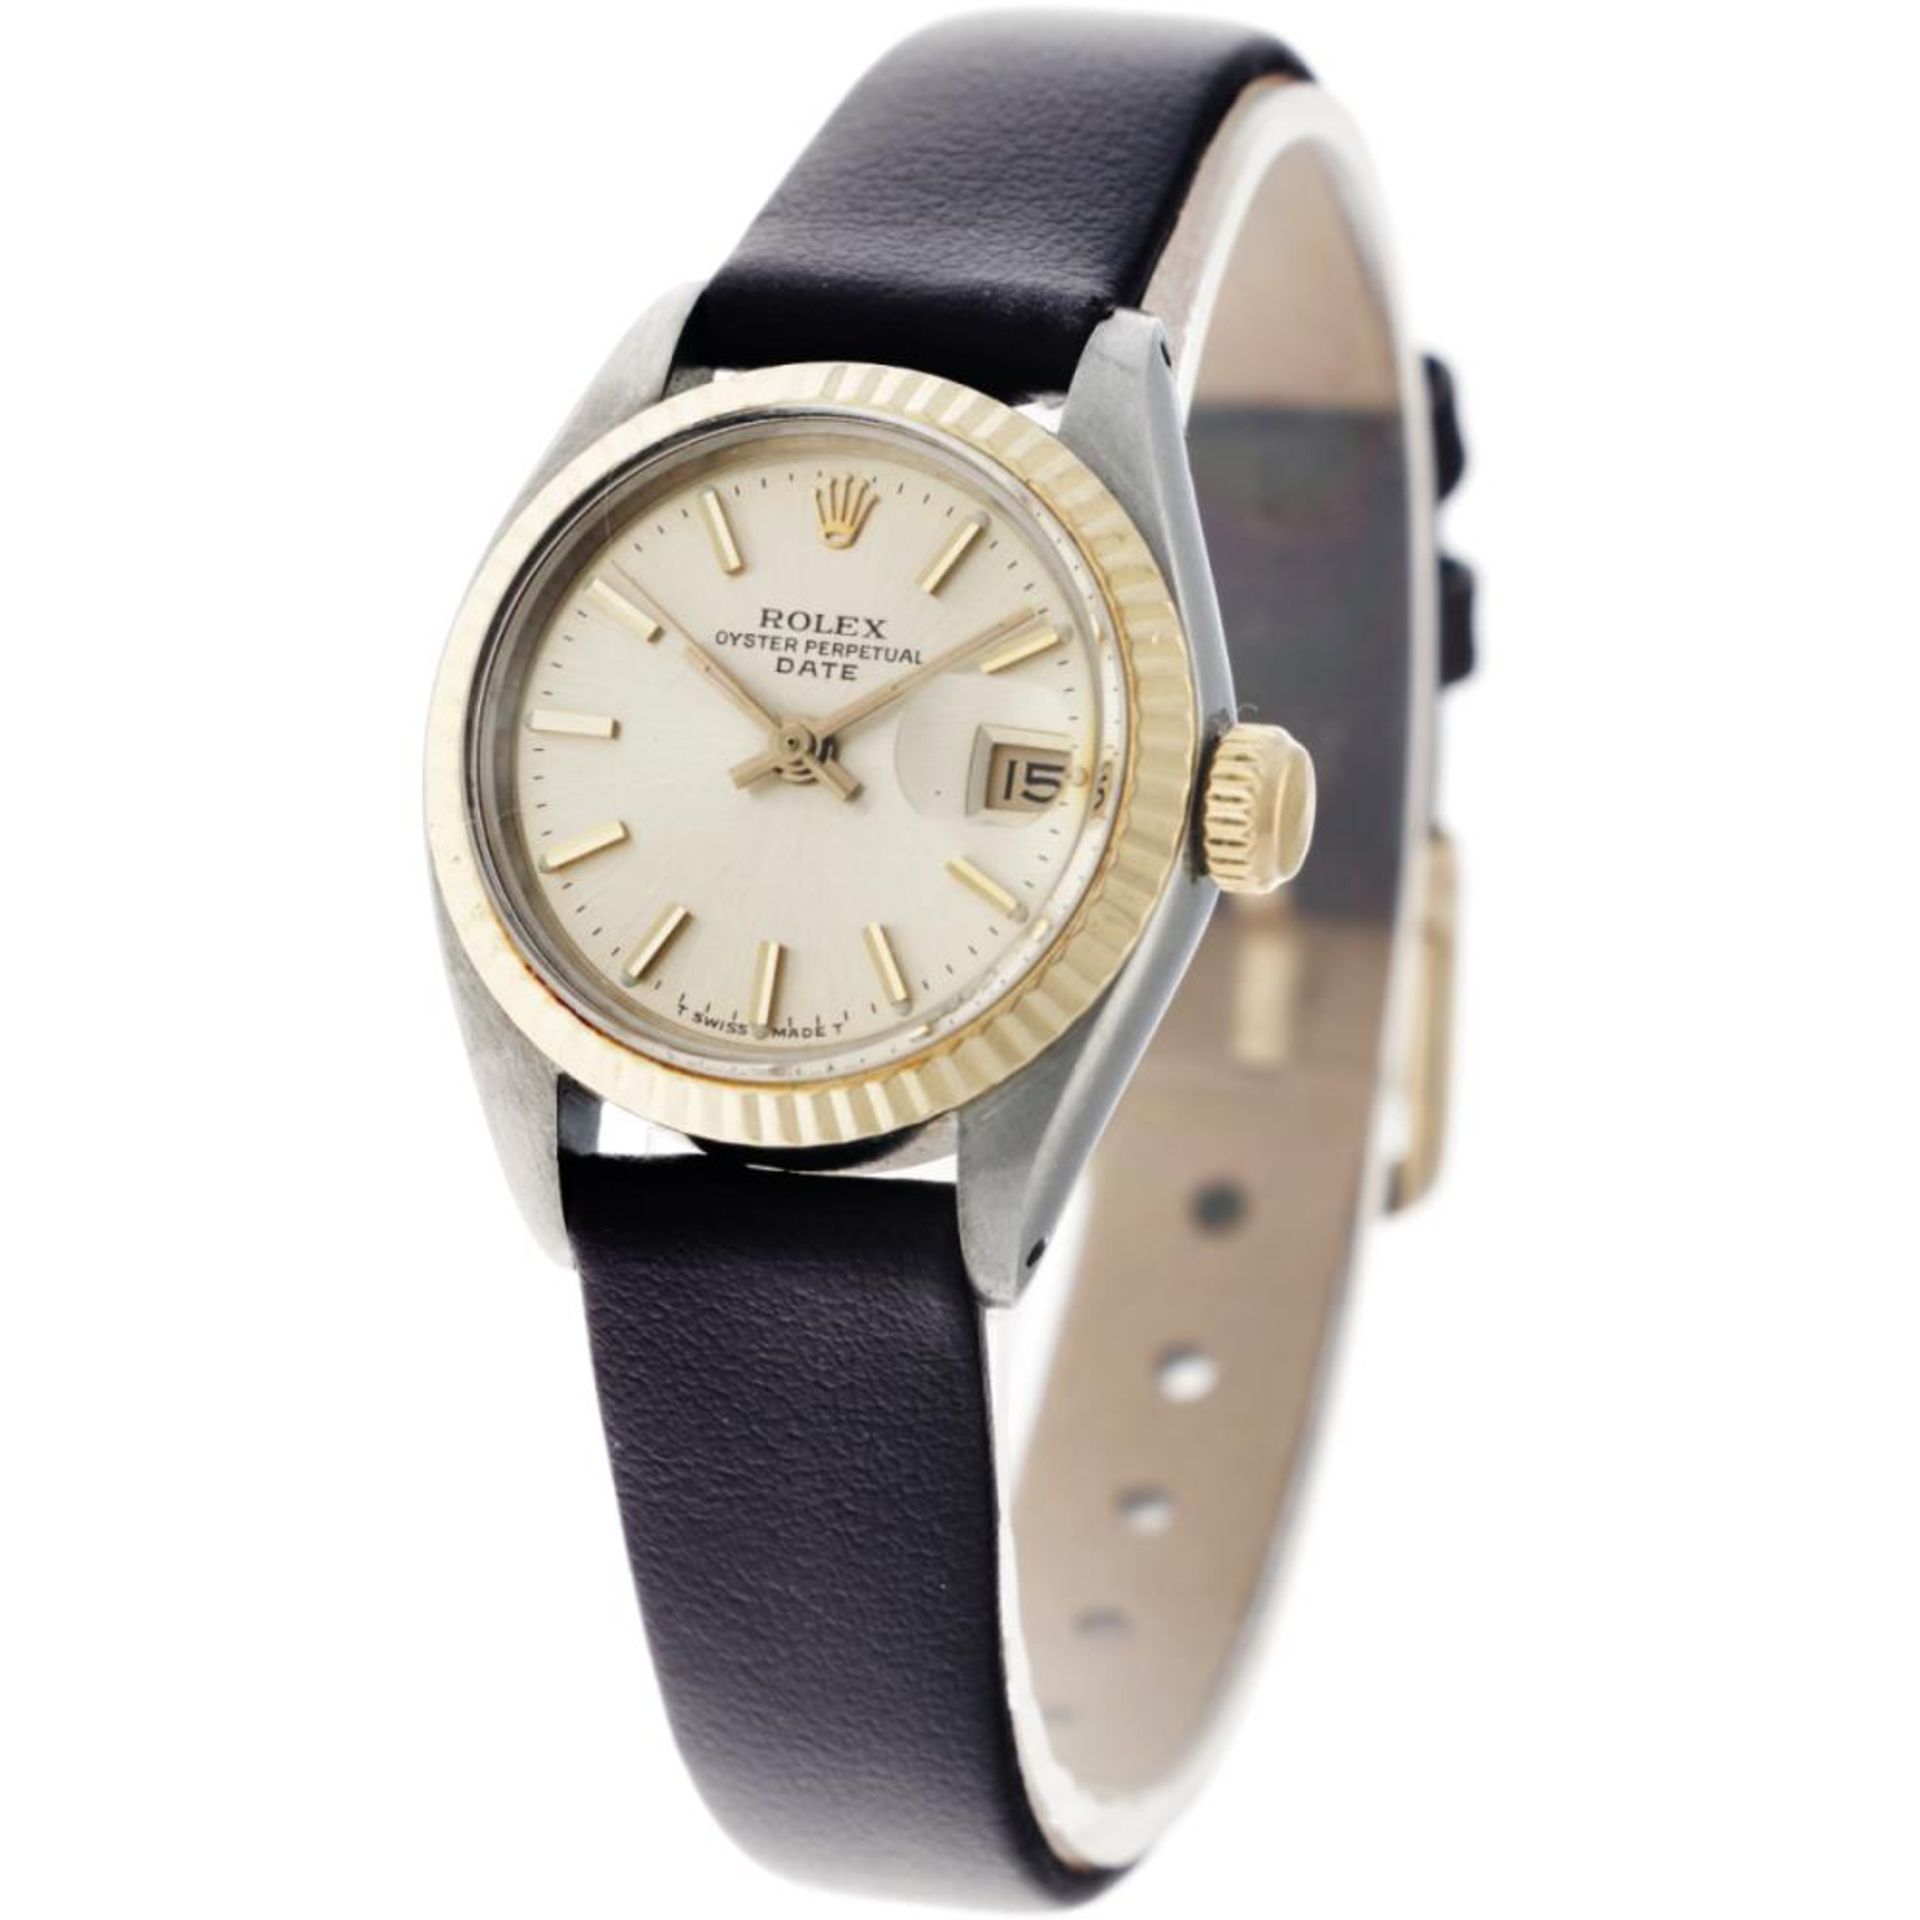 Rolex Date 6917 - Ladies watch - approx. 1975. - Image 2 of 6